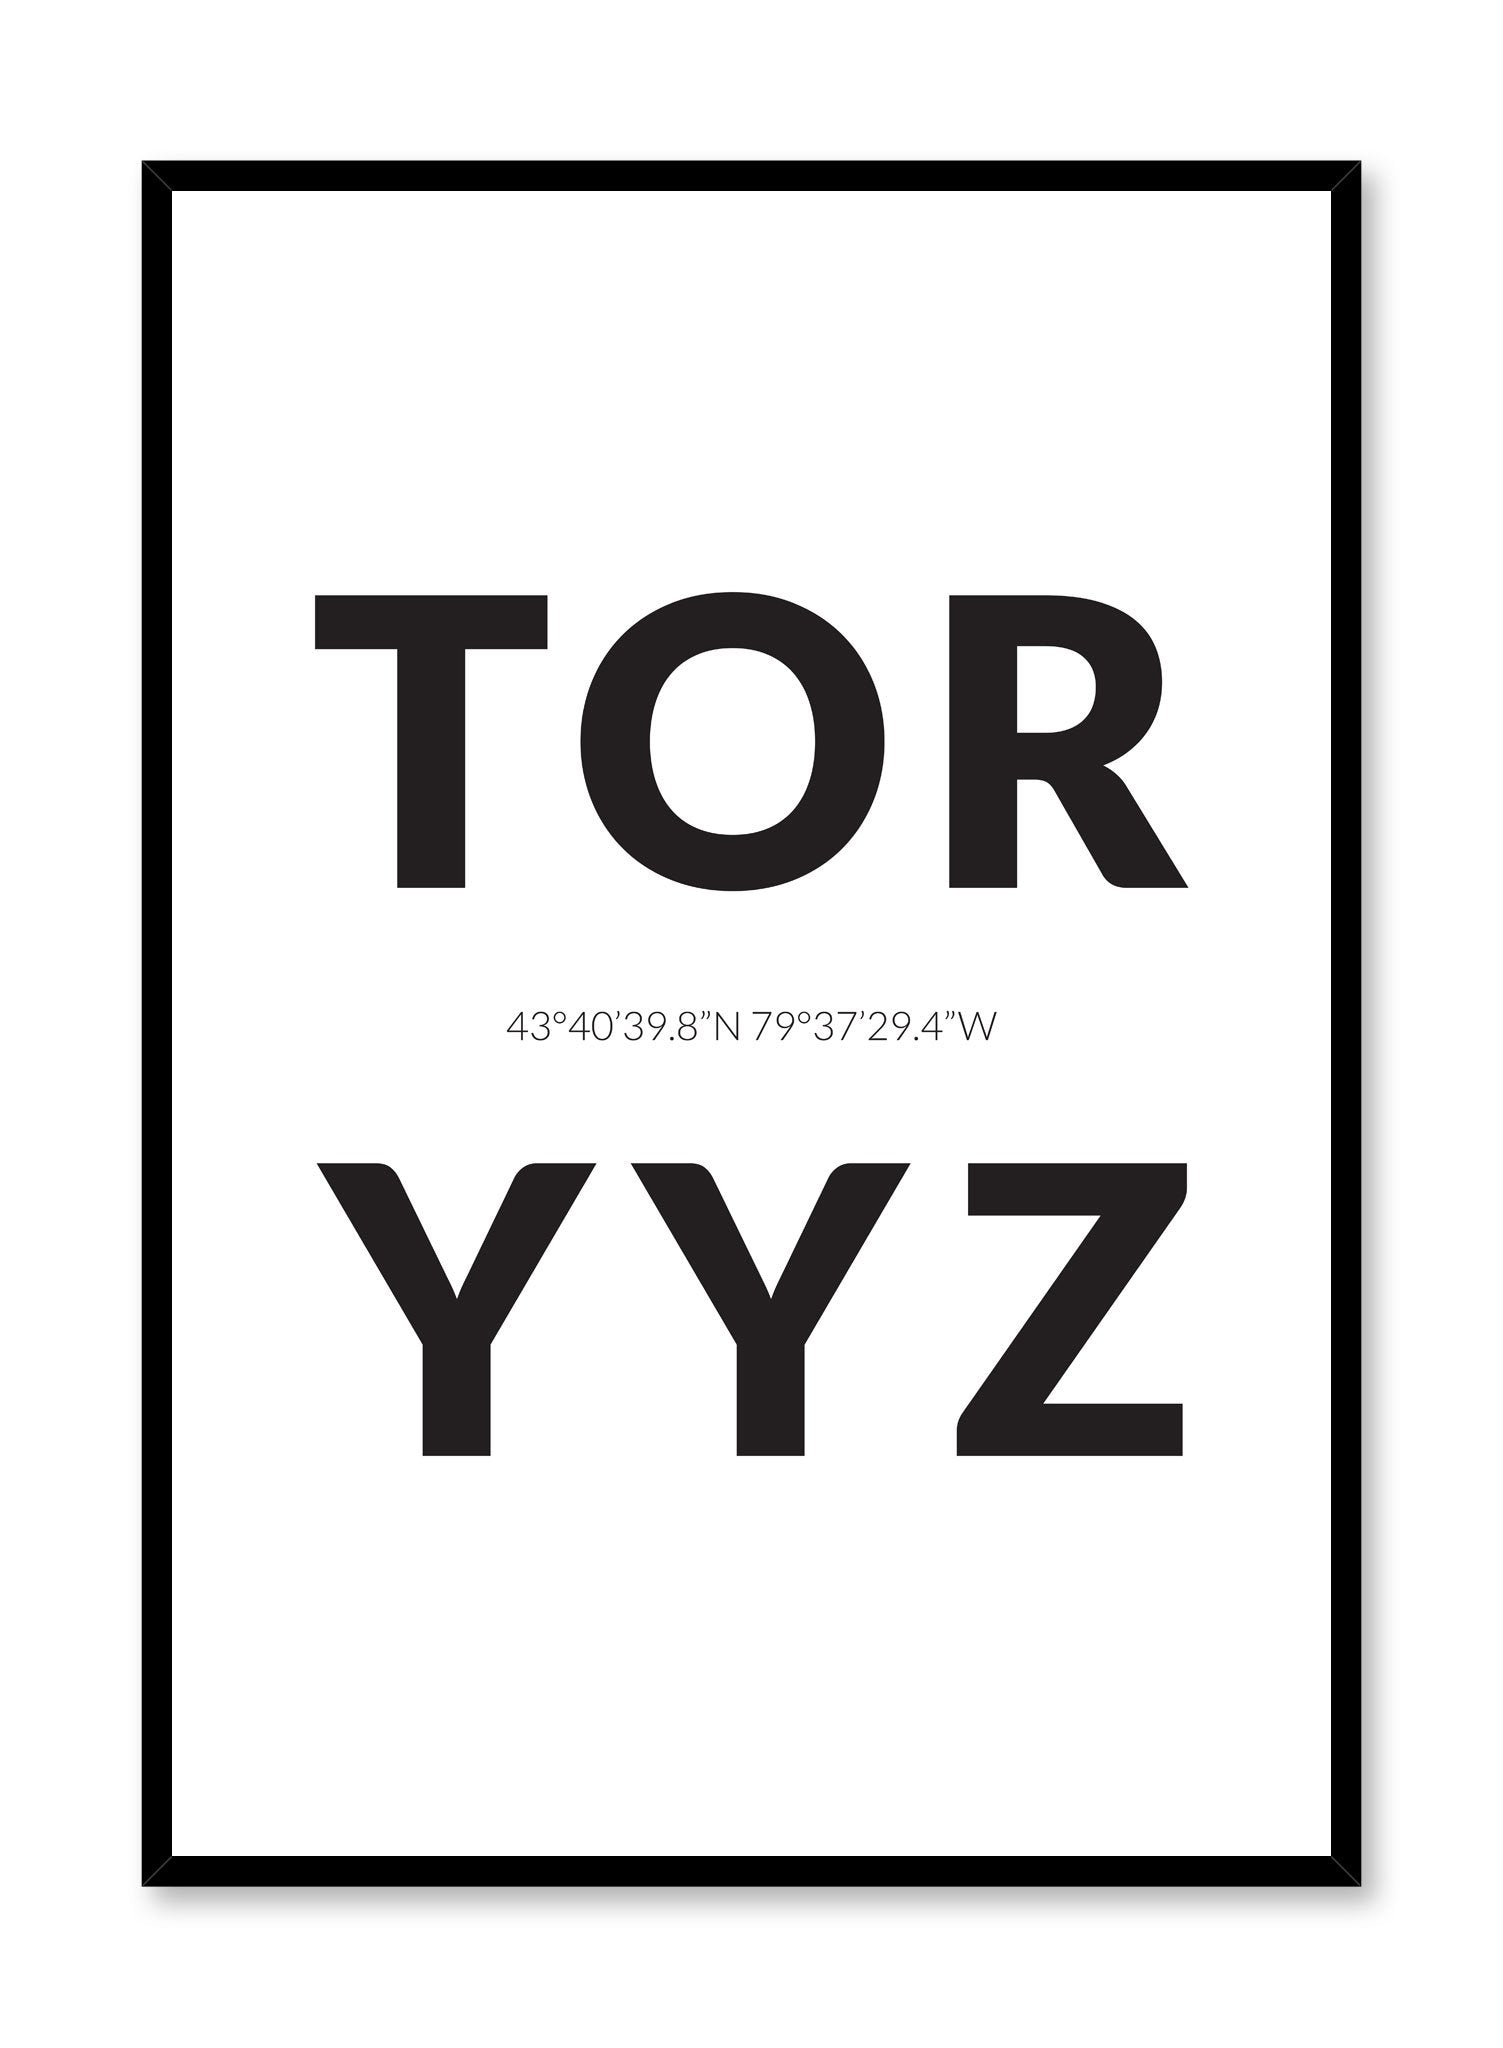 Minimalist design poster by Opposite Wall with airport code Toronto YYZ